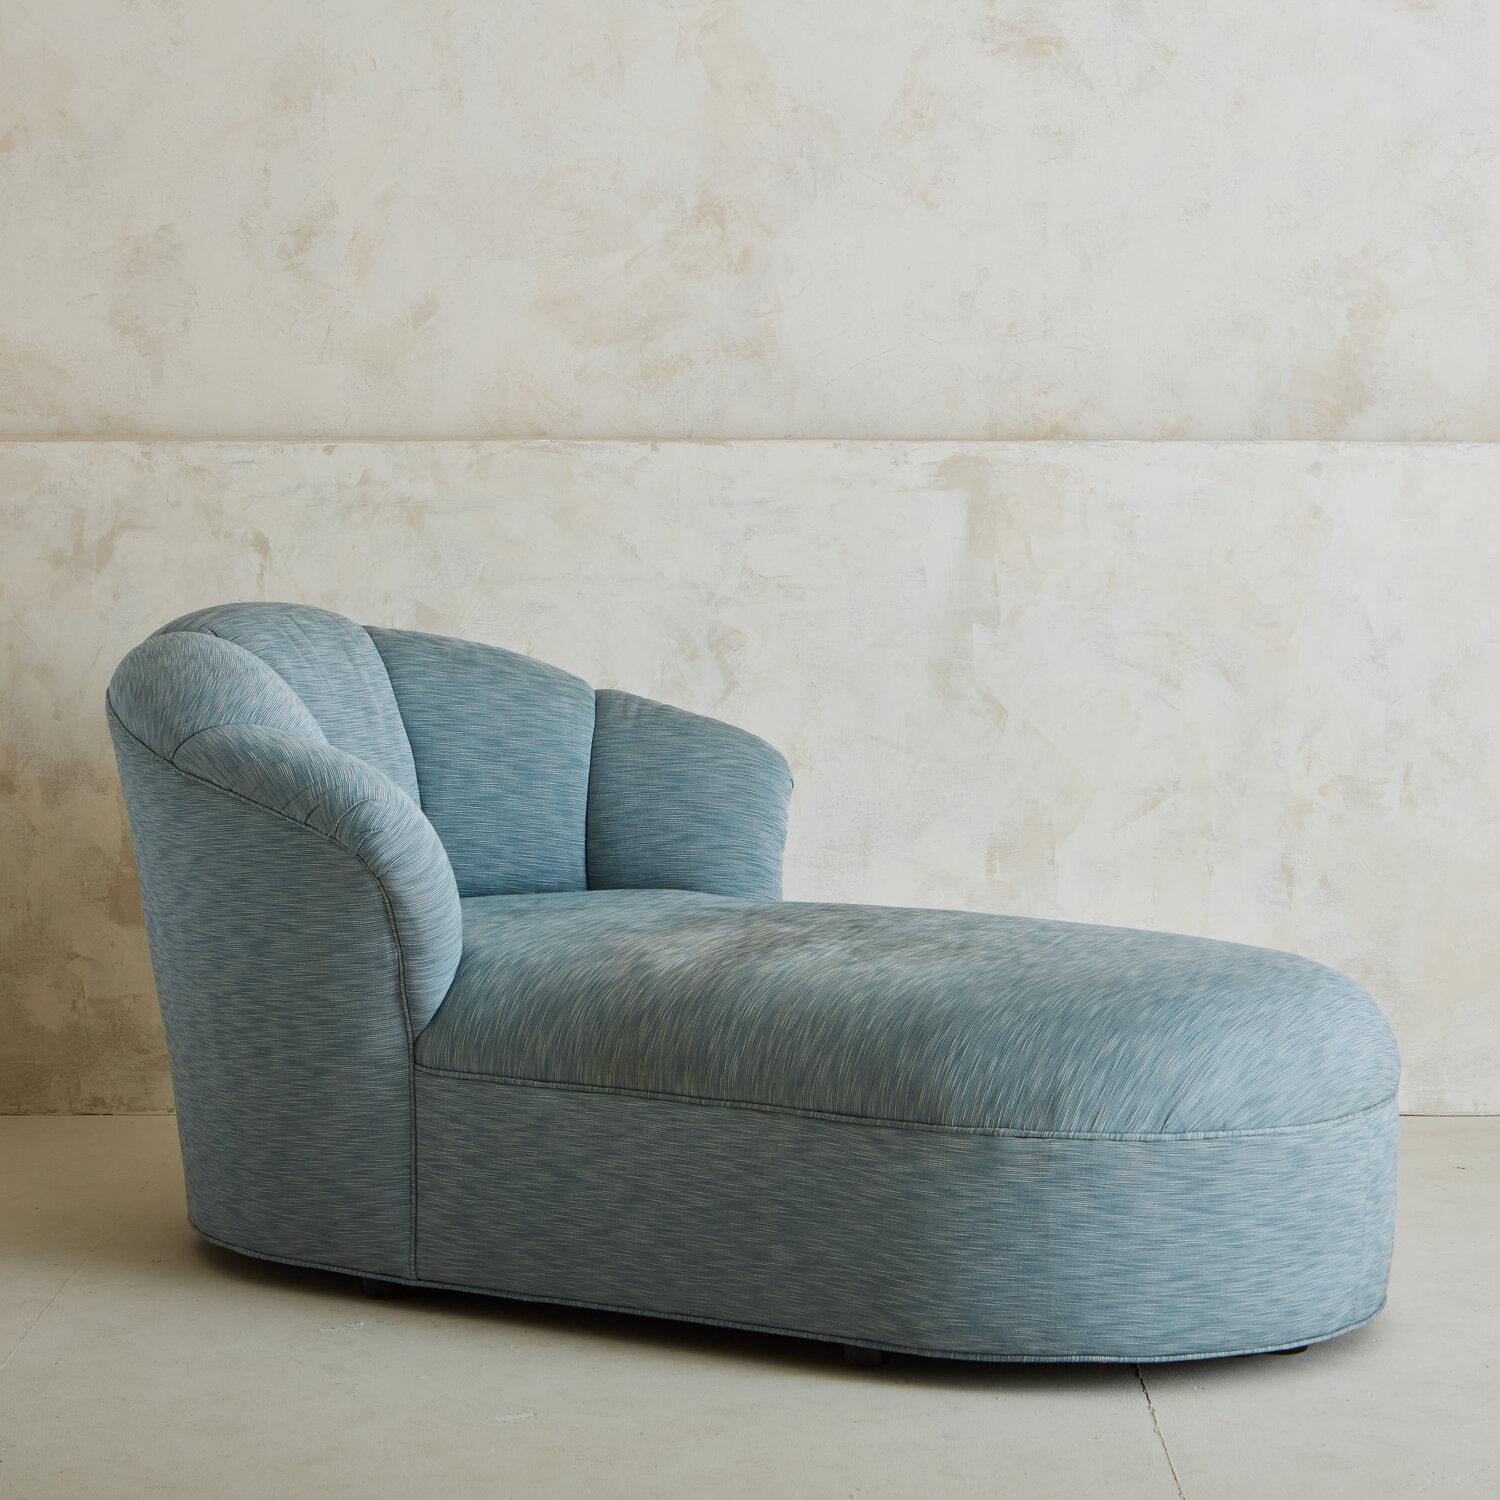 A long, curvaceous chaise lounge featuring a rounded scalloped back that extends upwards from the base. This chaise has a contemporary silhouette and sits just above the ground. It would look fabulous in a bedroom or reading nook.